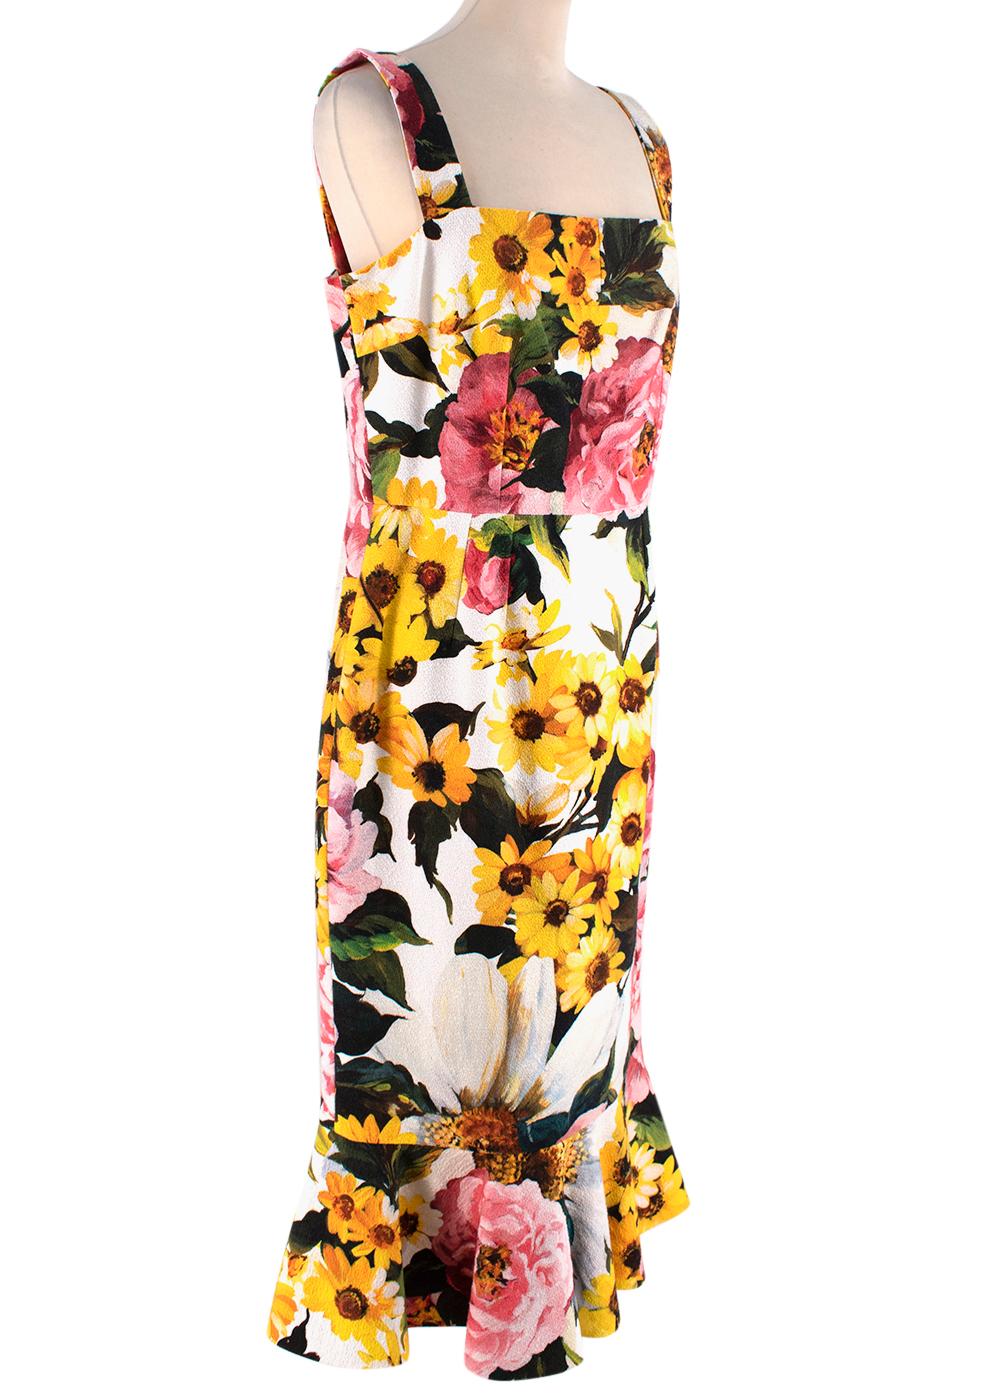 Dolce & Gabbana Floral Print Fitted Sleeveless Dress

- Multicoloured Floral print
- Sleeveless 
- Silver-tone invisible zipper 
- Fitted with a flared hem

No size or made in label 

PLEASE NOTE, THESE ITEMS ARE PRE-OWNED AND MAY SHOW SIGNS OF